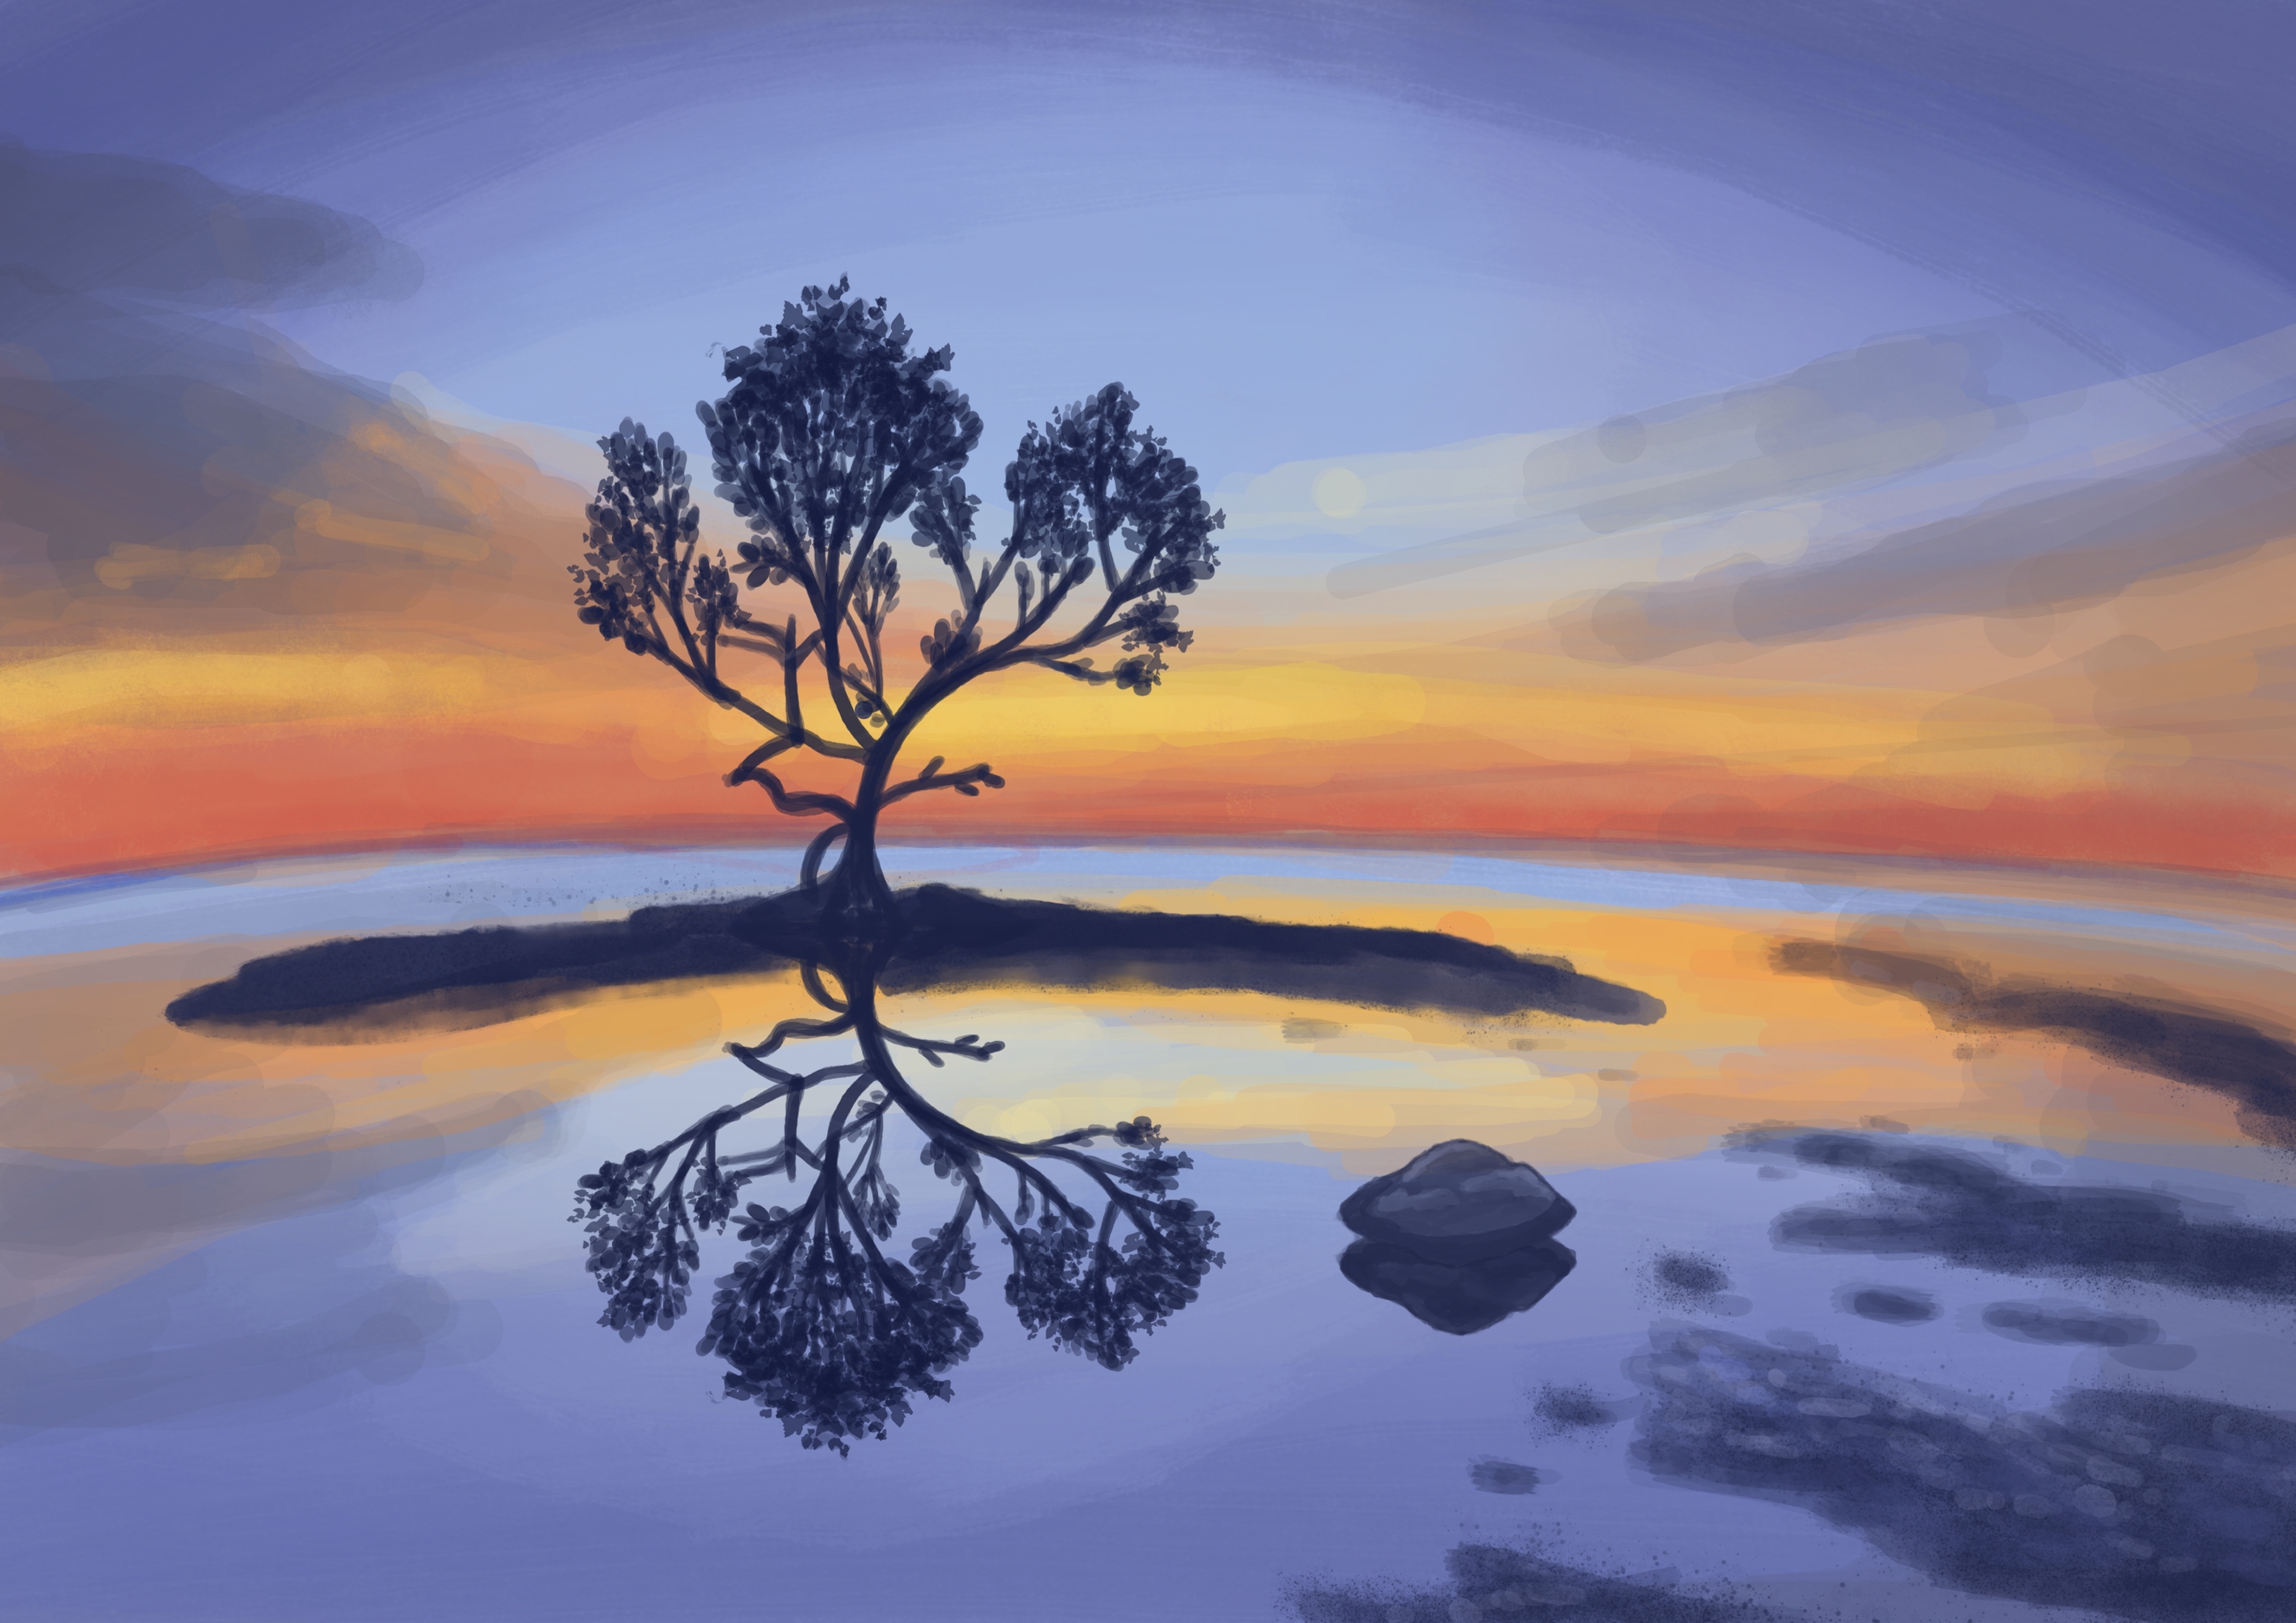 Image description: A tree and a rock standing in a shallow lake in the sunset. The sky is blue with a bright red, orange and yellow sunset. The lake is the bottom half of the picture, reflects the tree, rock and sky